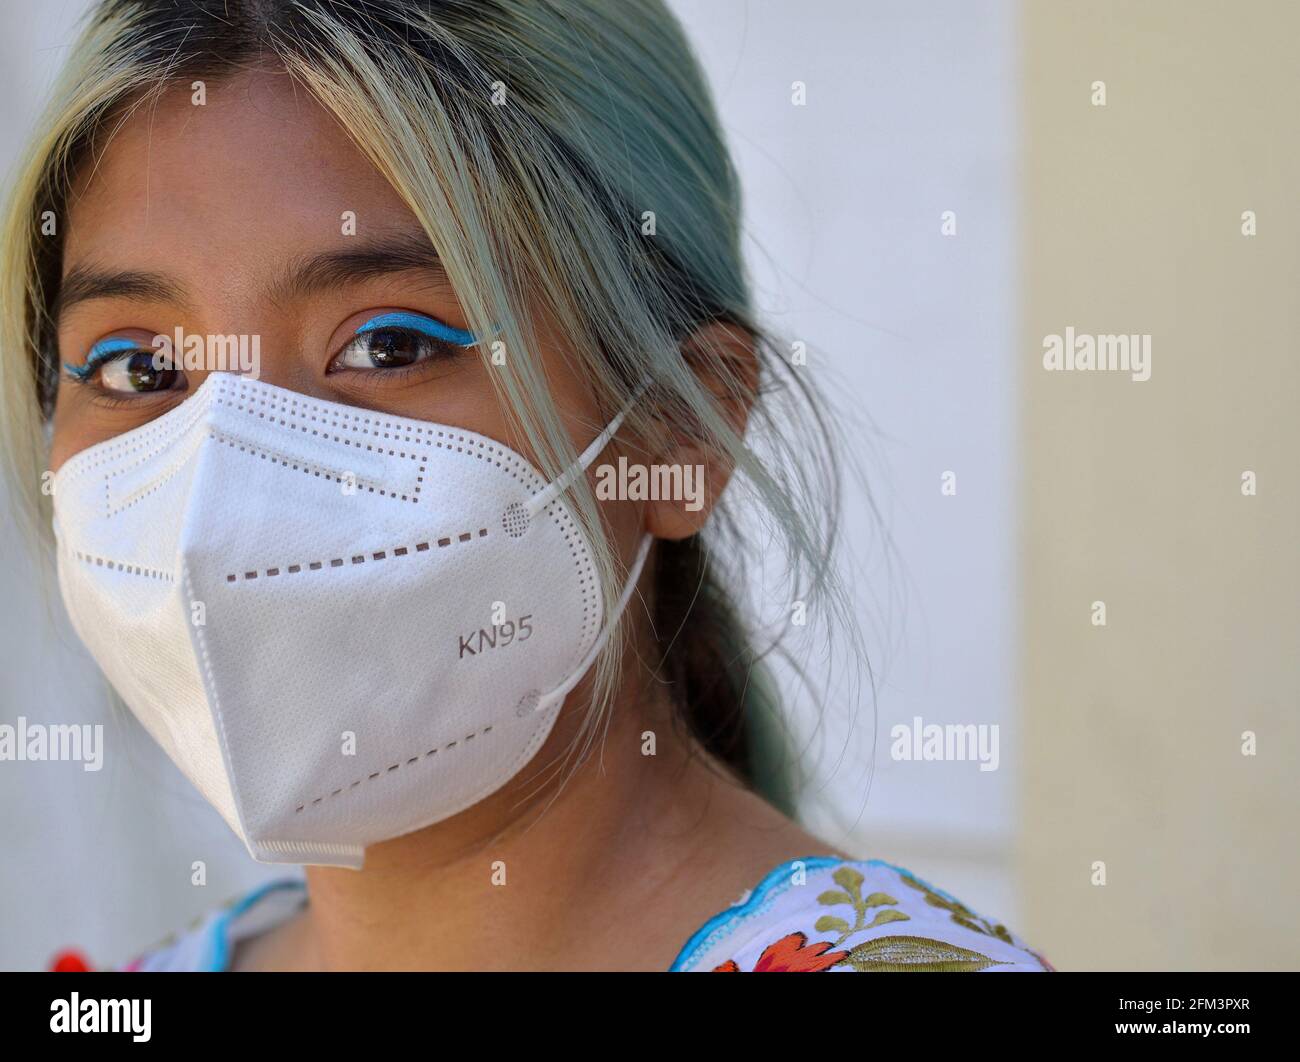 Mexican teen girl with dyed hair, big brown eyes and elaborate blue eye makeup wears a white KN95 face mask during the global coronavirus pandemic. Stock Photo